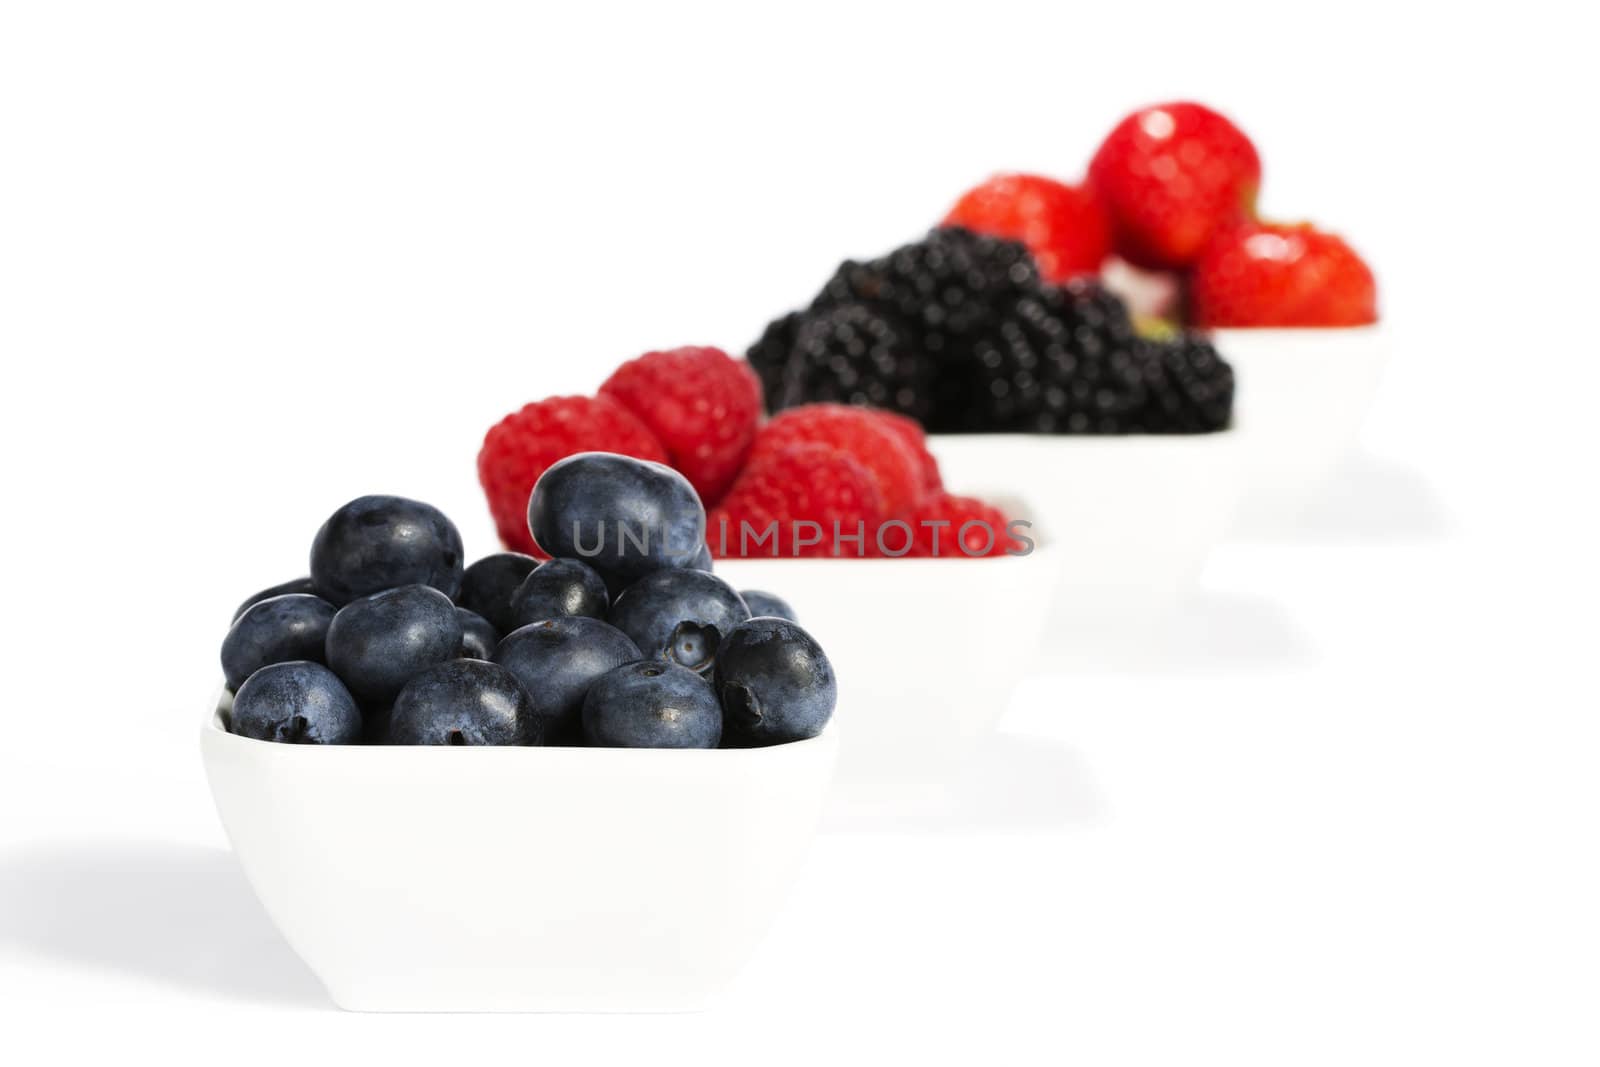 blueberries in a bowl with other berries in background by RobStark